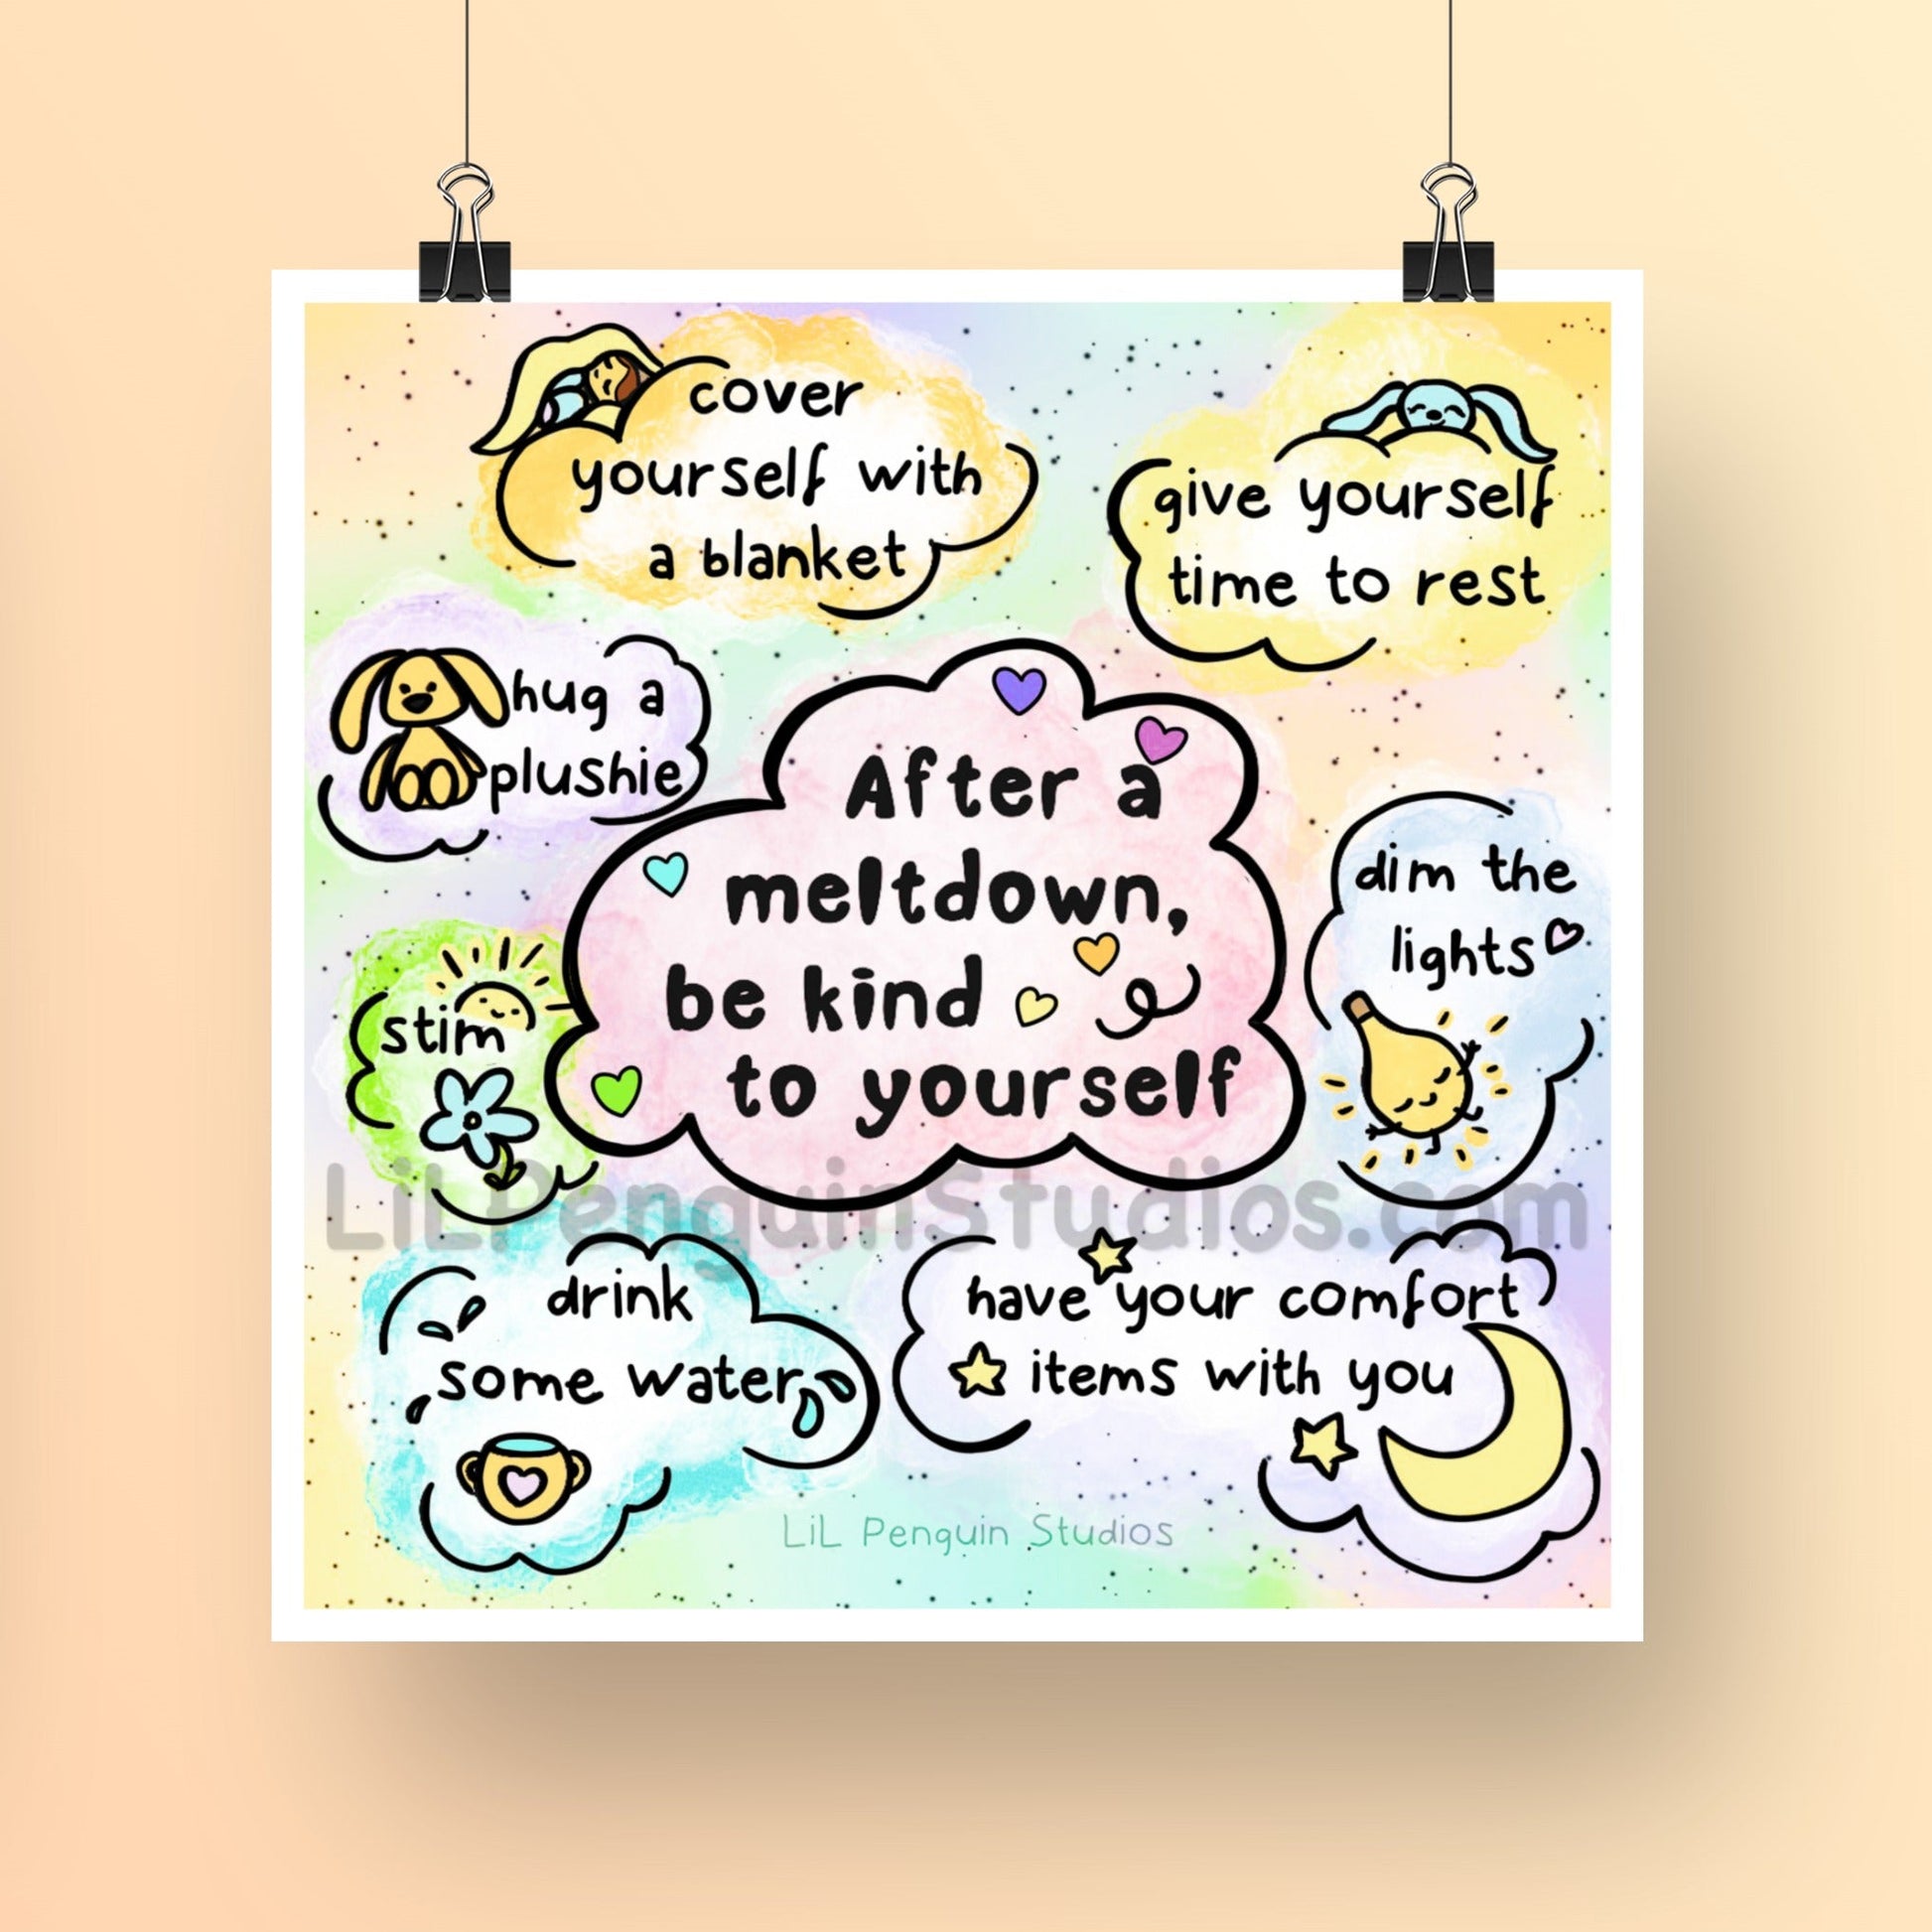 "After and autistic meltdown, be kind to yourself" poster.